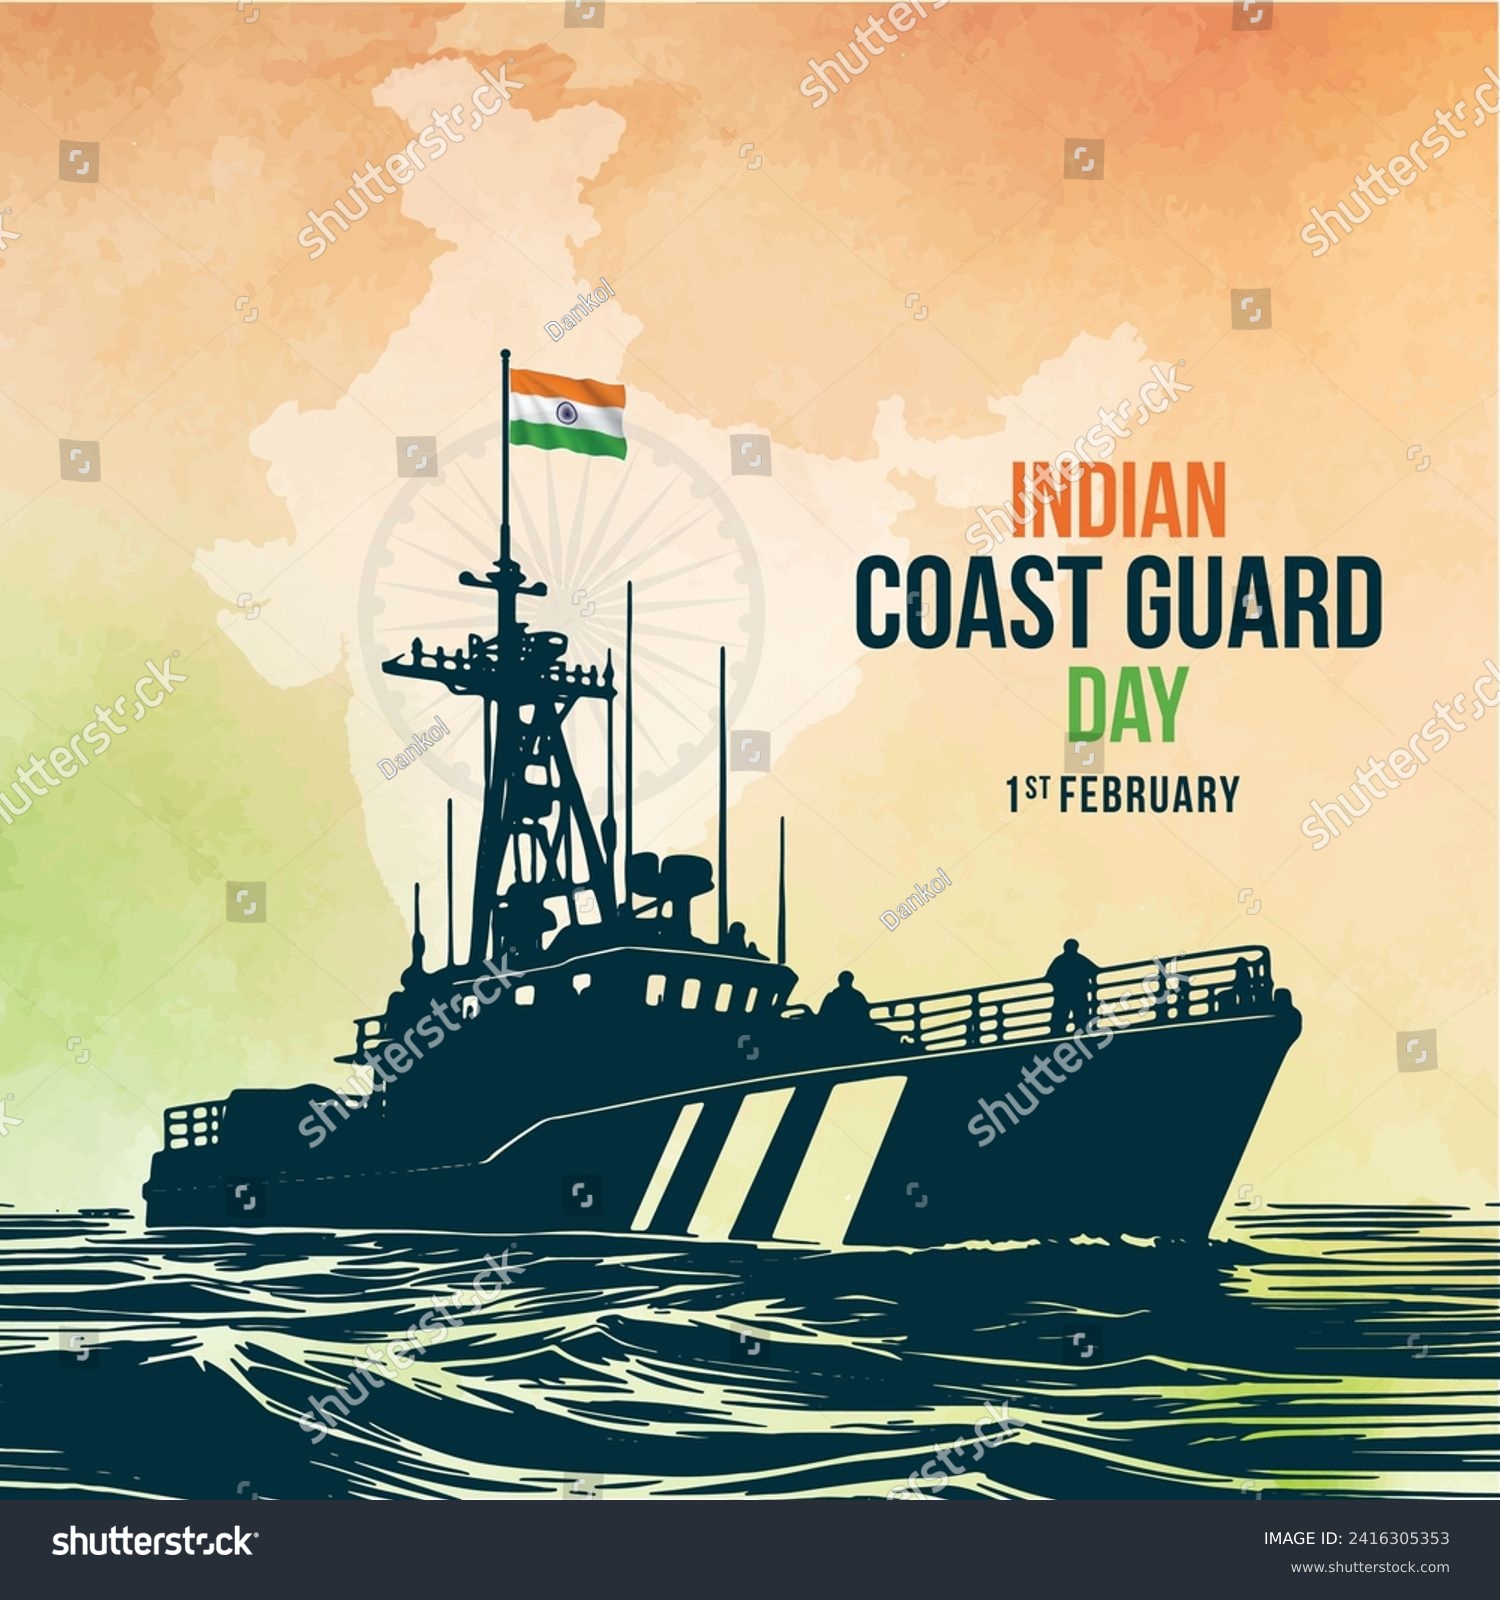 Indian Coast Guard Day 1st February,  Tricolor background, Social Media Design Square Post Vector Template  #2416305353